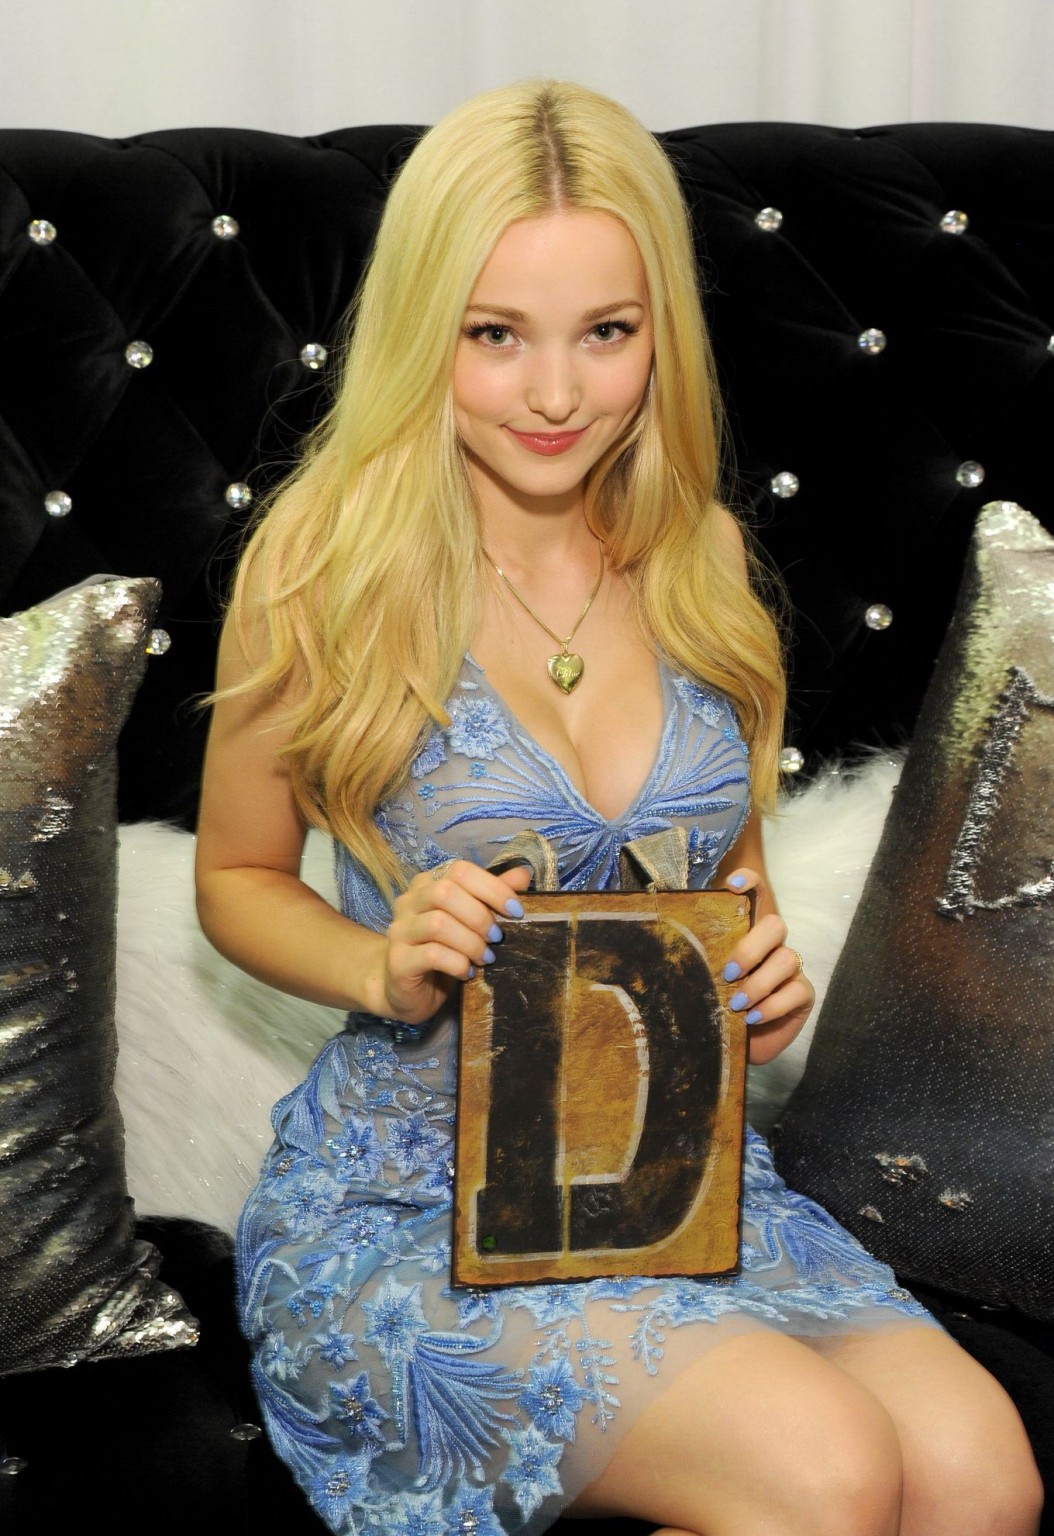 Dove Cameron busty and leggy in see through mini dress #75154058